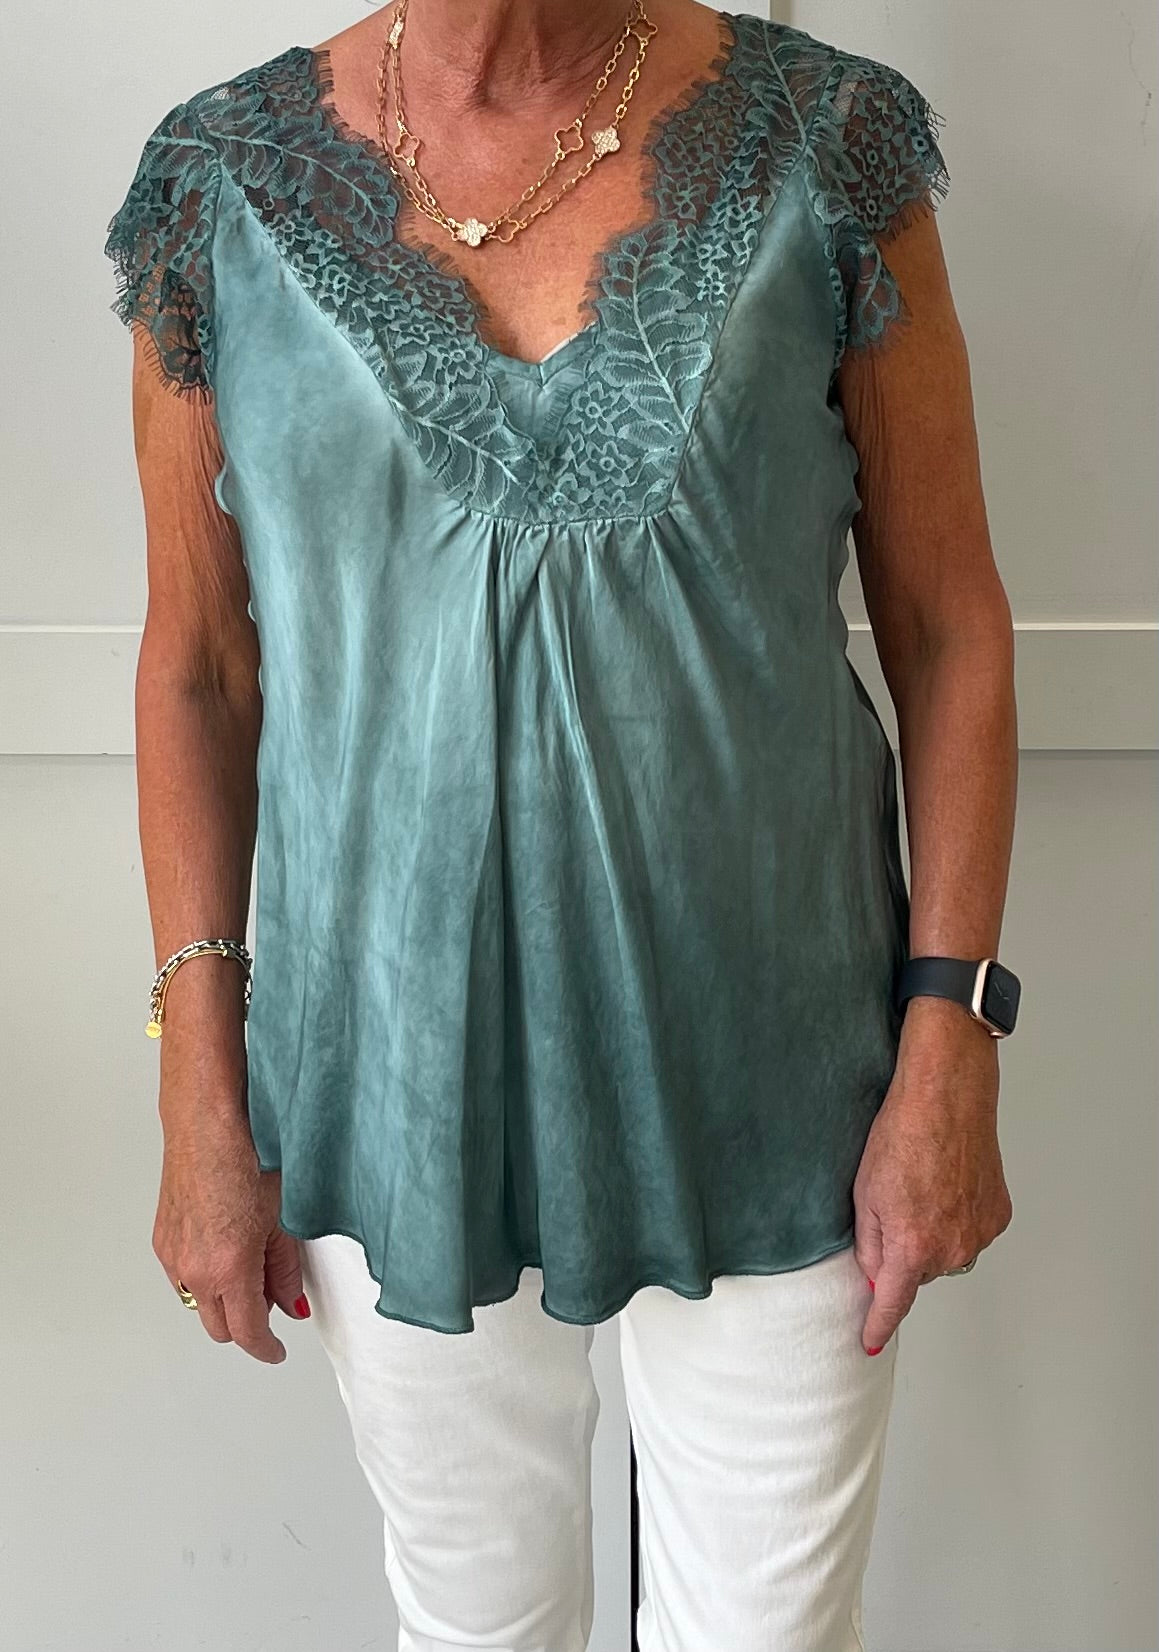 The Lucy - Luxury Satin Lace T- Shirt